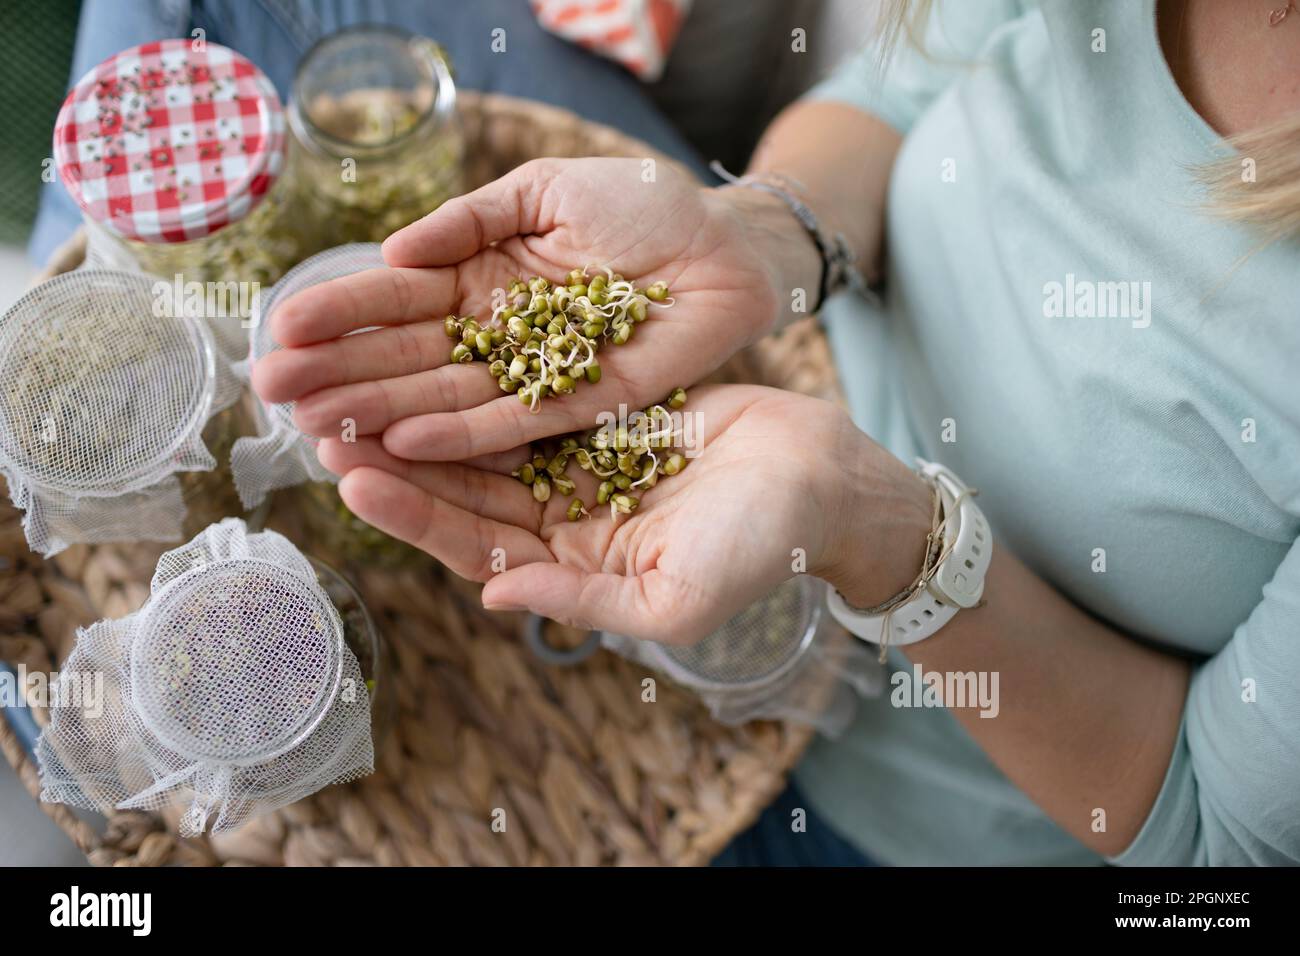 Woman showing bean sprouts at home Stock Photo